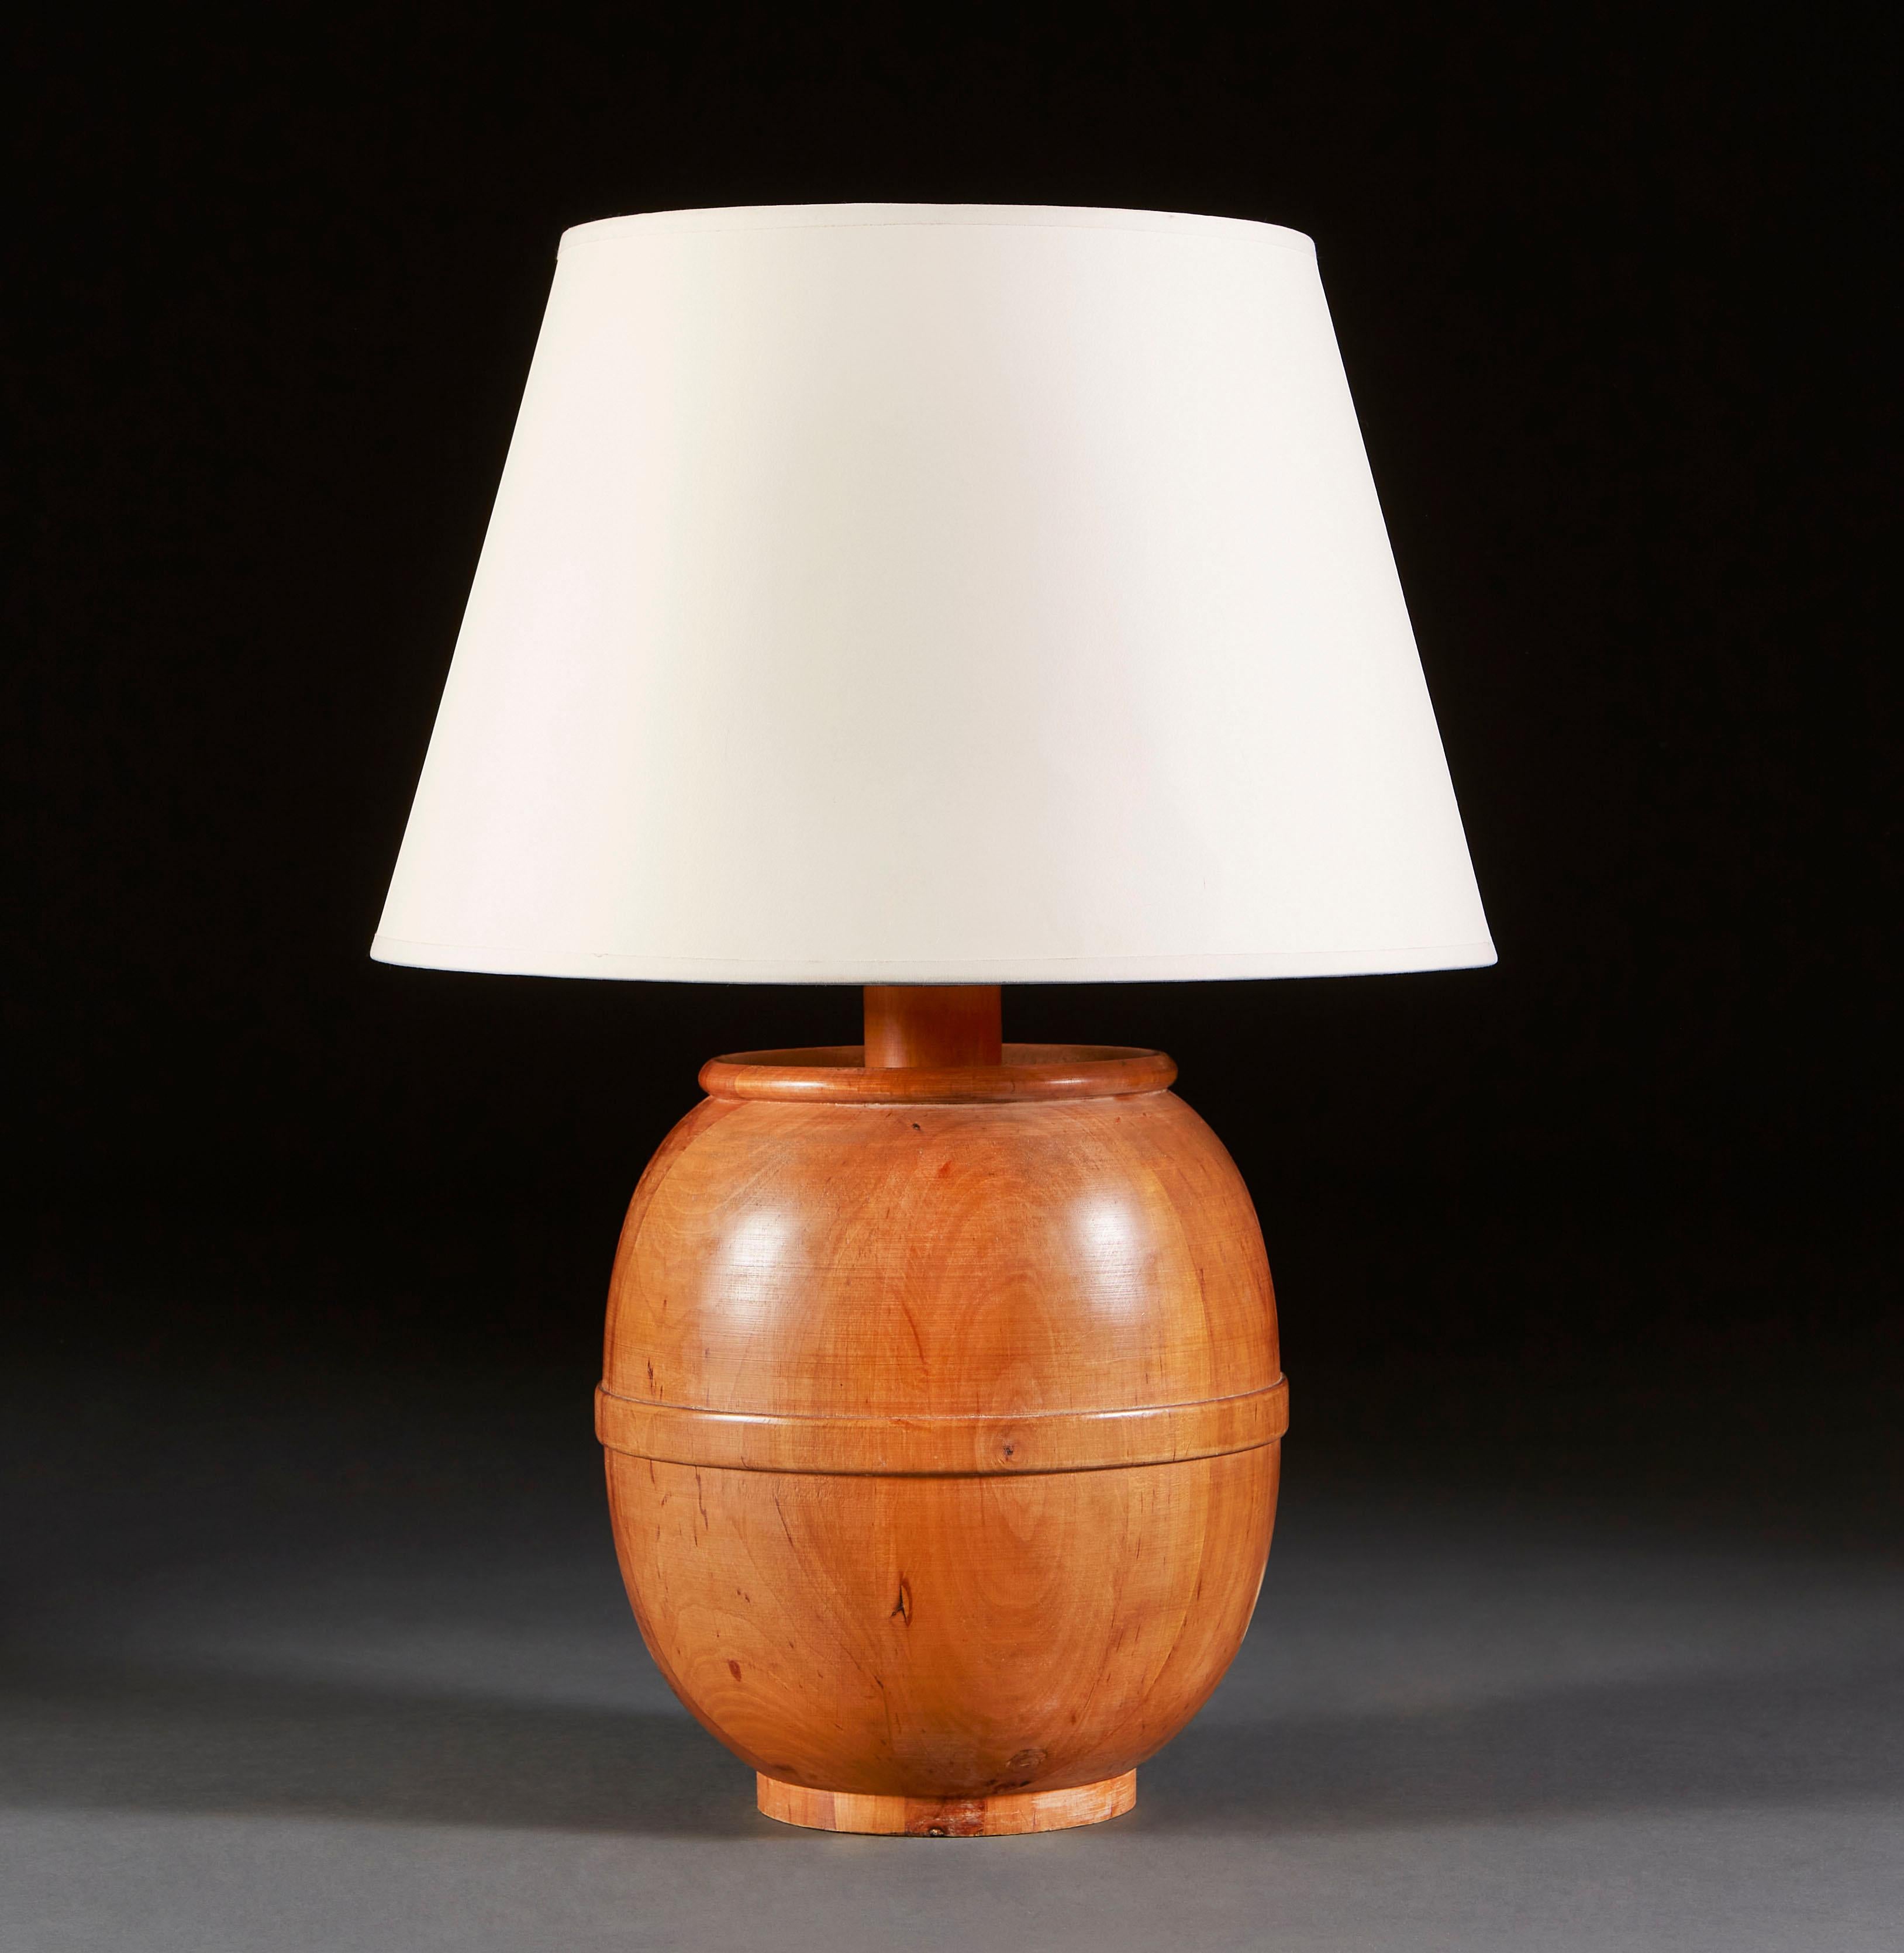 A mid century walnut lamp in the form of a barrel, with strap carved around the waist.

Currently wired for the UK.

Please note: lampshade not included.